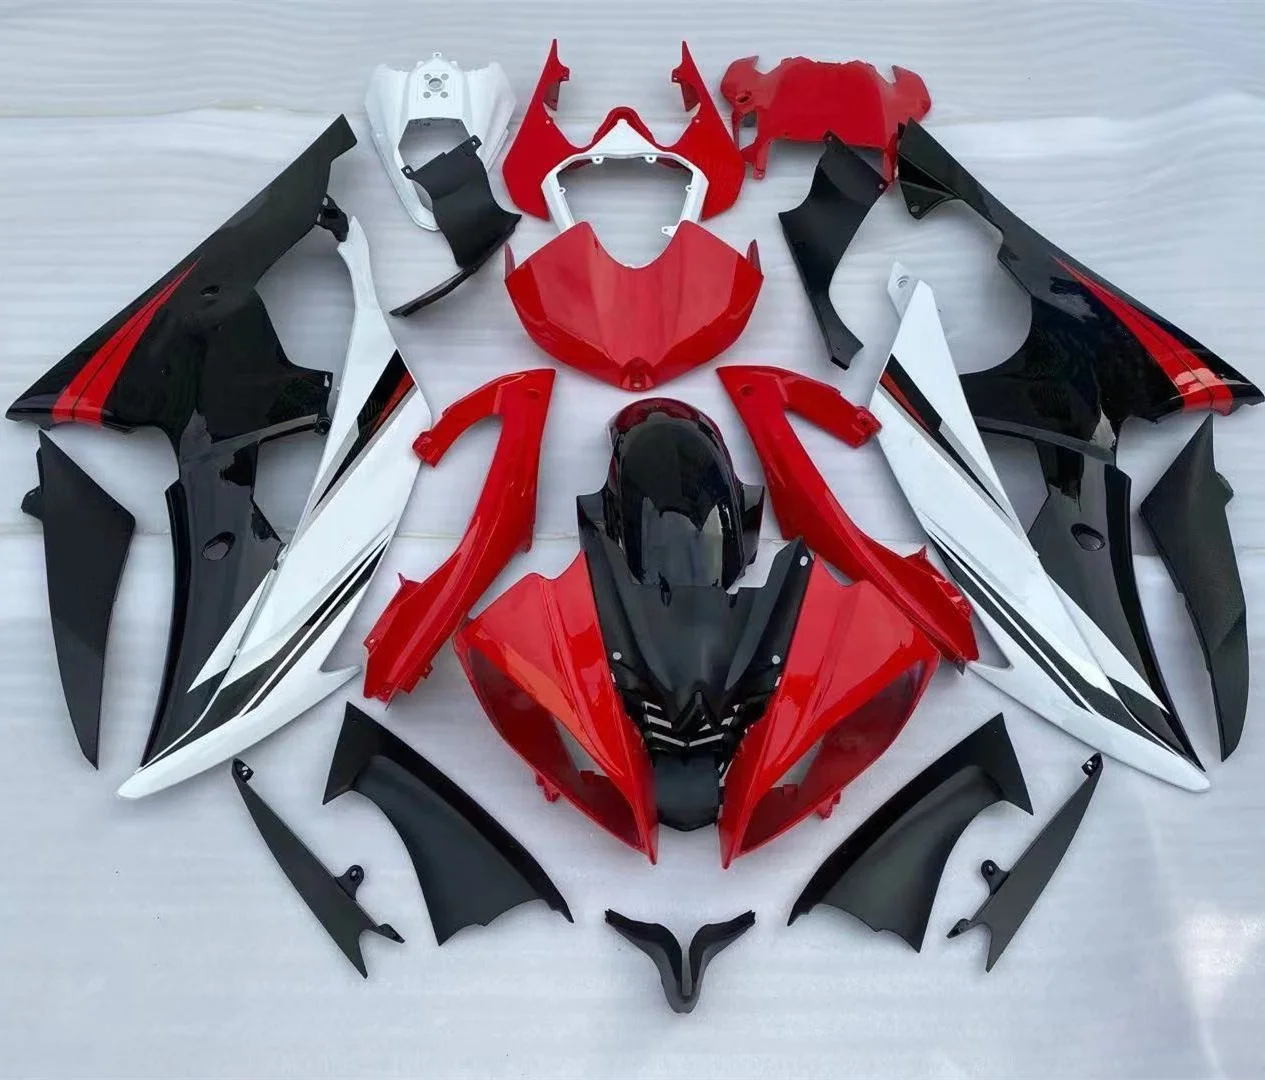 

2022 WHSC ABS Injection Plastic Fairing Body Parts Kit For YAMAHA R6 2008, Pictures shown